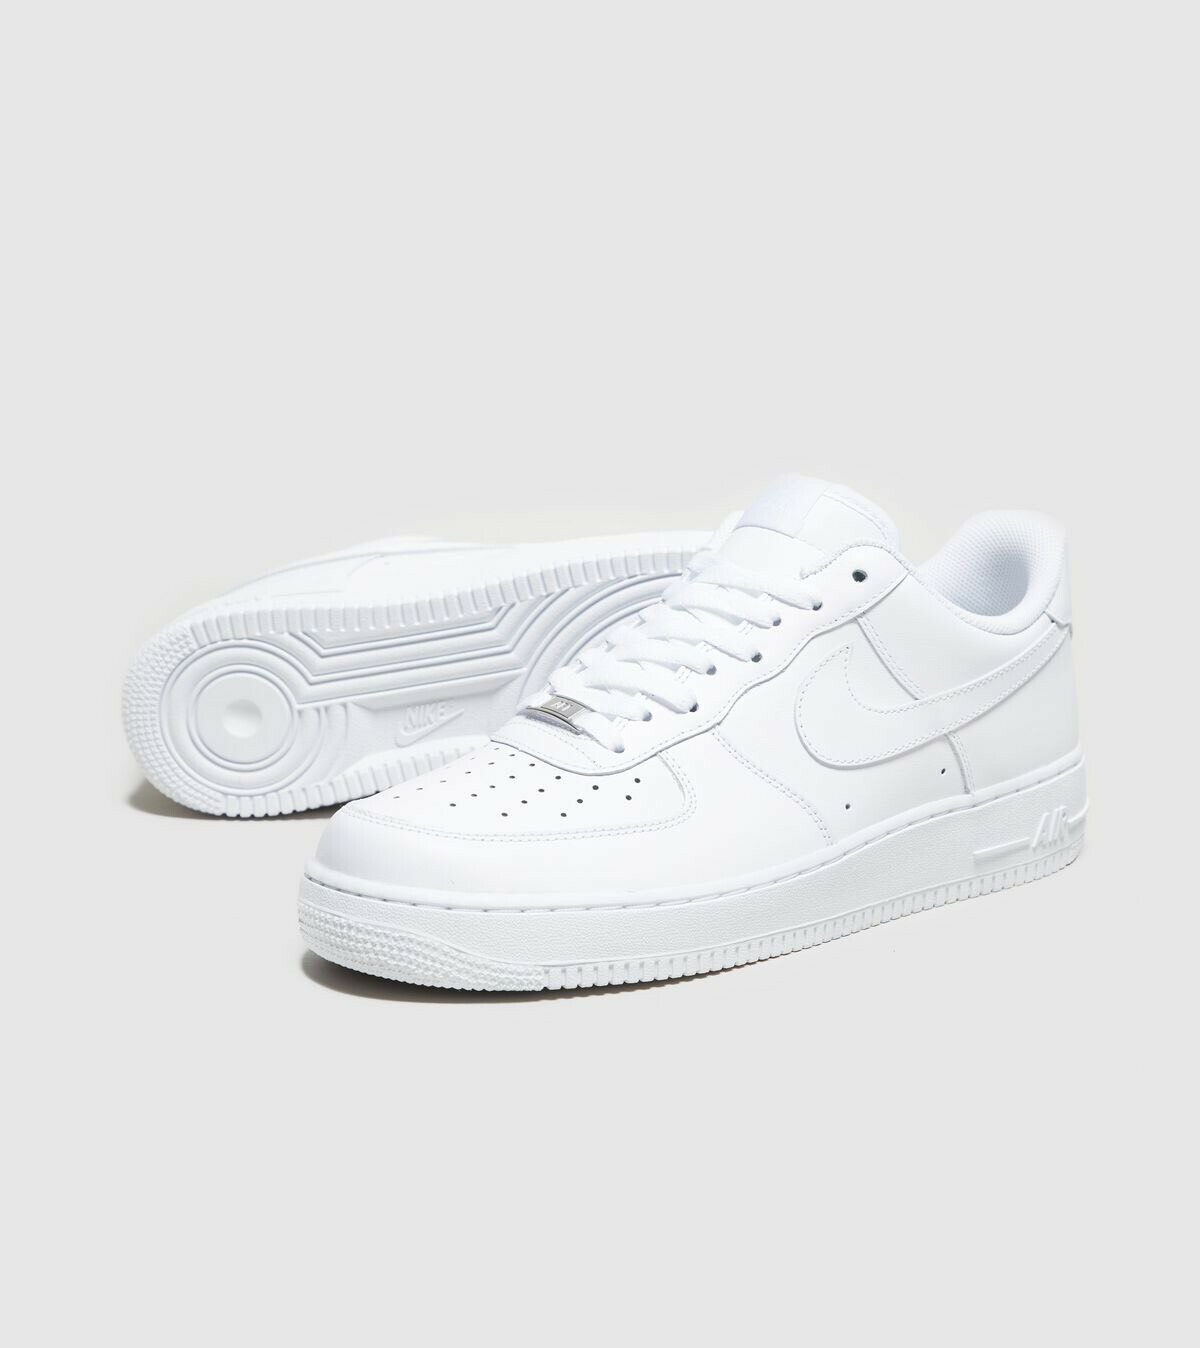 NIKE AIR FORCE 1 LOW GS - WHITE